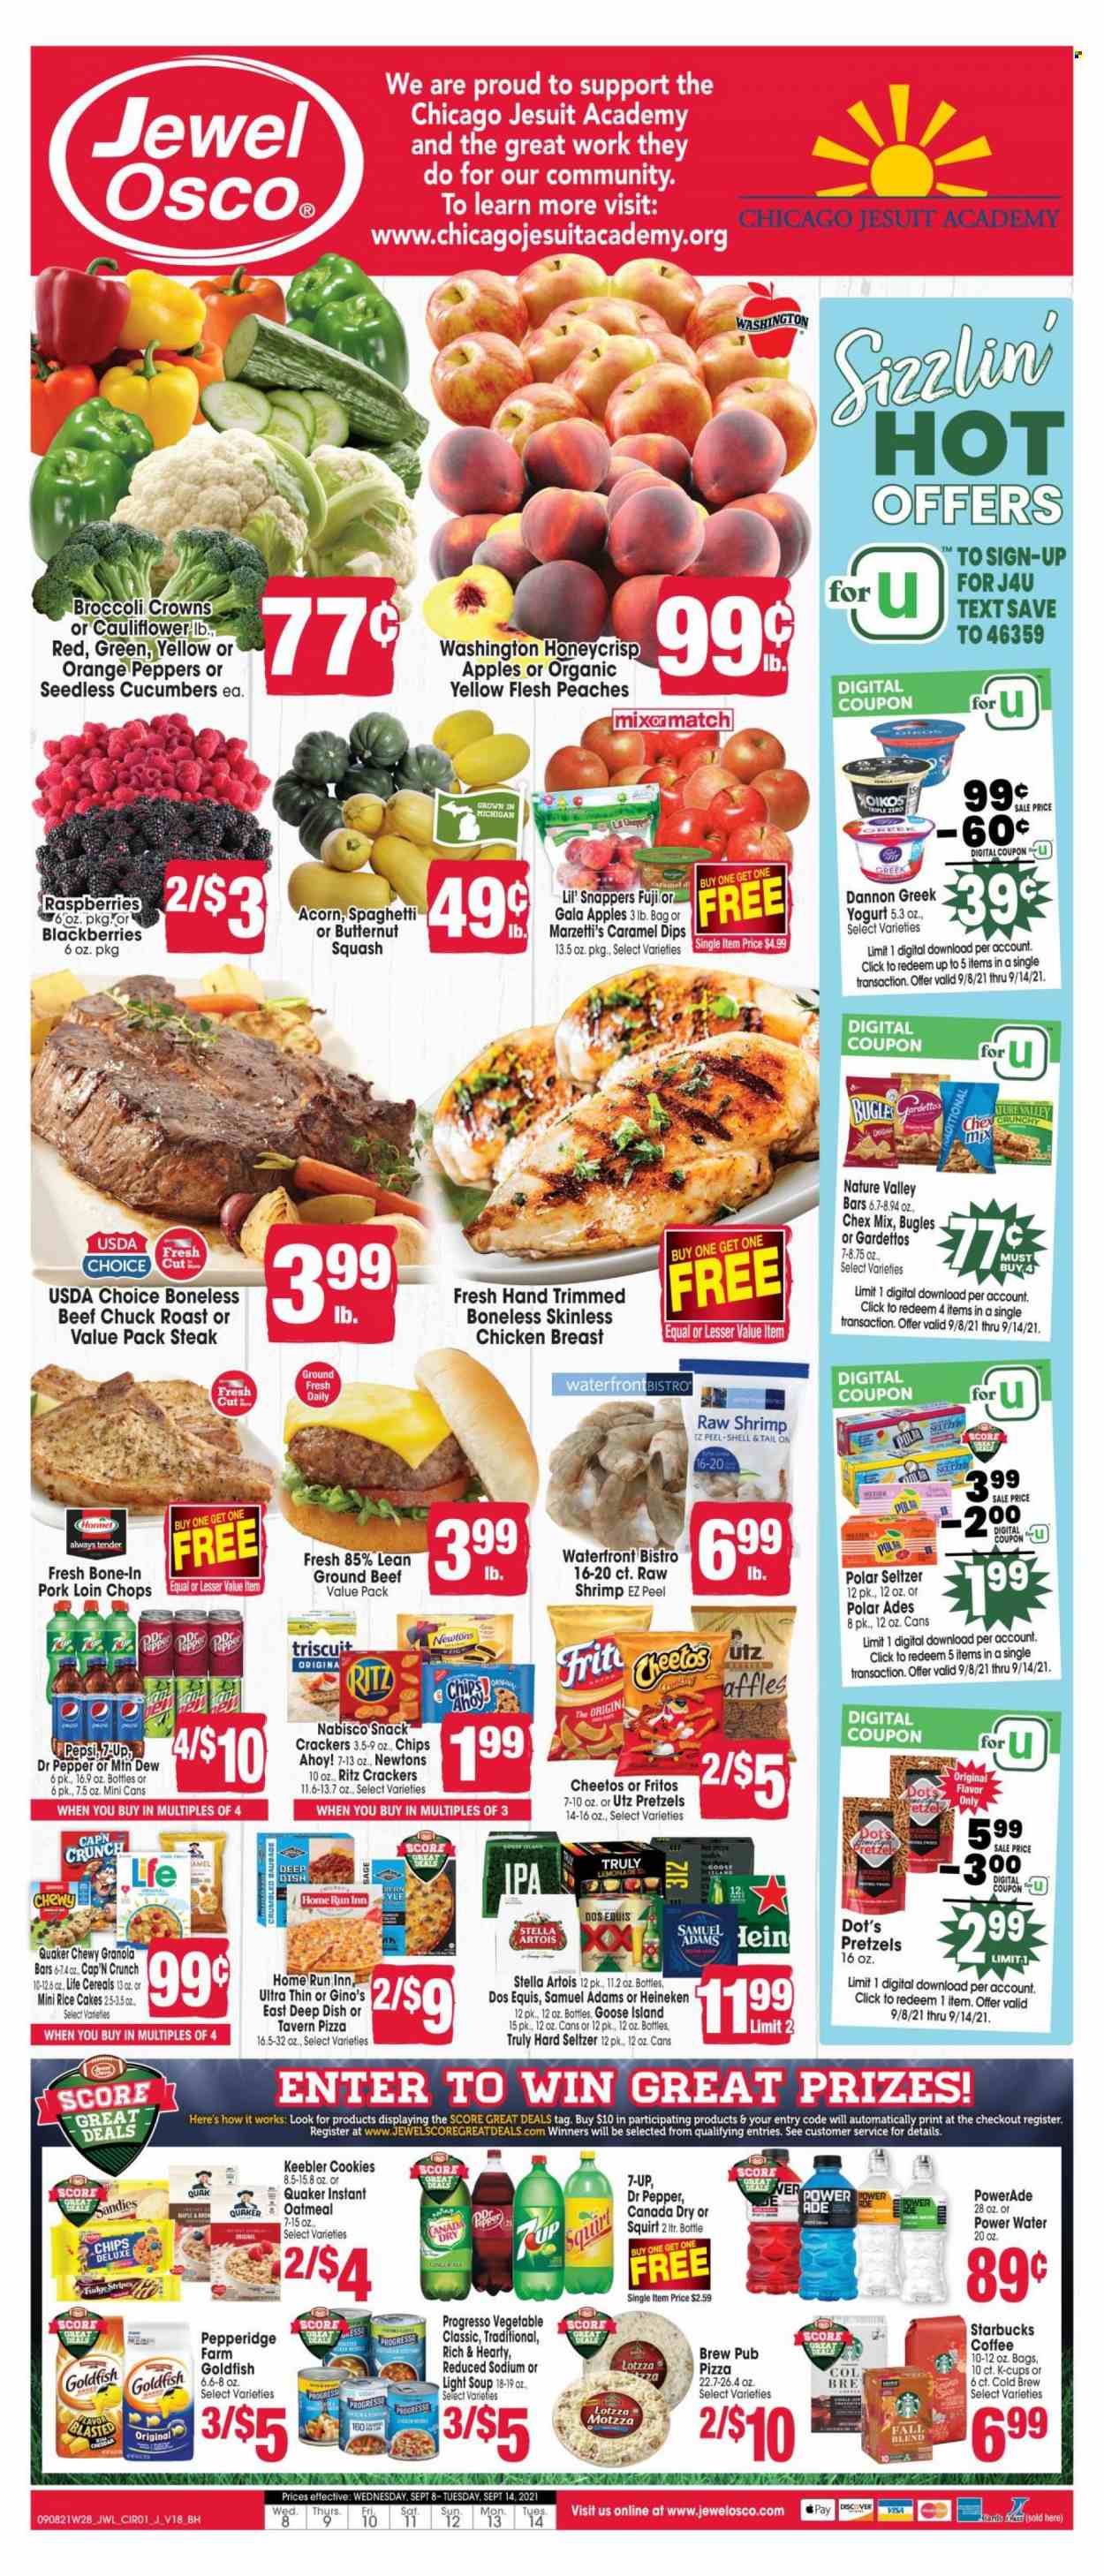 thumbnail - Jewel Osco Flyer - 09/08/2021 - 09/14/2021 - Sales products - pretzels, cucumber, peppers, apples, Gala, oranges, shrimps, spaghetti, pizza, soup, Quaker, Progresso, Hormel, sausage, yoghurt, Oikos, Dannon, cookies, fudge, snack, crackers, Chips Ahoy!, Keebler, RITZ, Fritos, Cheetos, chips, Goldfish, Chex Mix, oatmeal, cereals, granola bar, Cap'n Crunch, Nature Valley, rice, caramel, Canada Dry, lemonade, Mountain Dew, Powerade, Pepsi, Dr. Pepper, 7UP, coffee, Starbucks, coffee capsules, K-Cups, Hard Seltzer, TRULY, beer, Heineken, IPA, chicken breasts, beef meat, ground beef, steak, chuck roast, pork chops, pork loin, pork meat, butternut squash, Stella Artois, Dos Equis, peaches. Page 1.